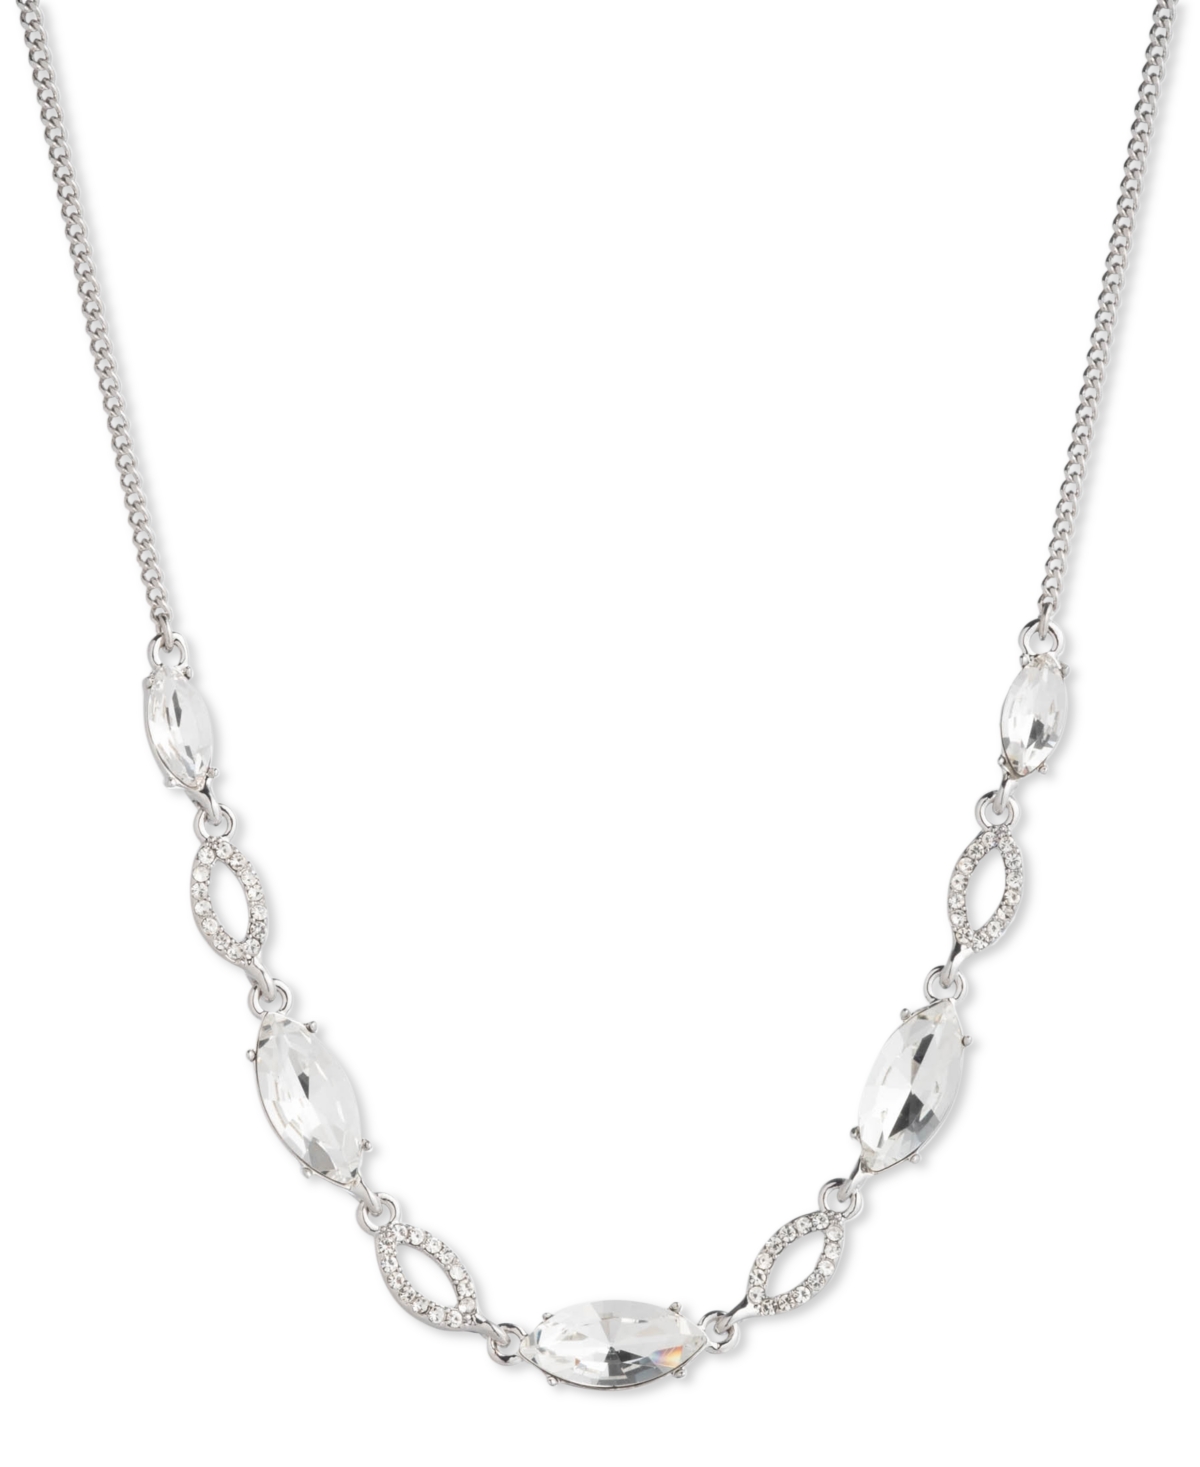 Pave & Crystal Statement Necklace, 16" + 3" extender - Silver